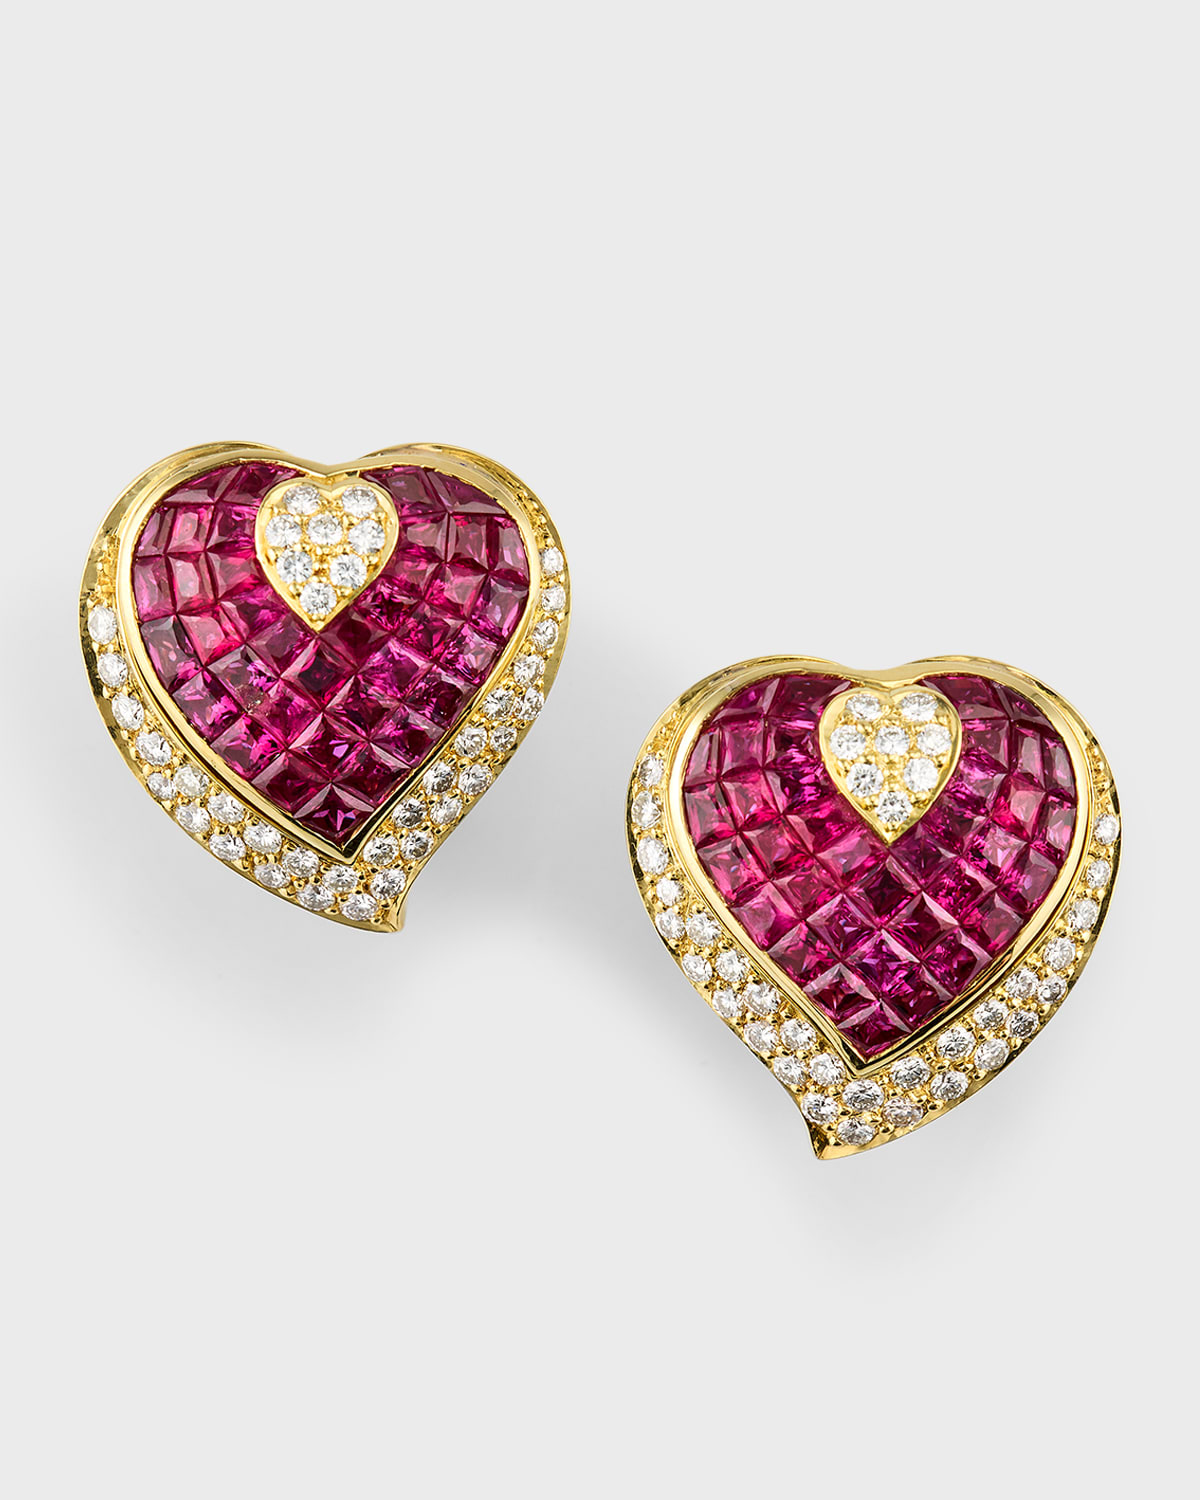 Nm Estate Estate 18k Yellow Gold Pave Diamond And Invisible Set Ruby Heart Earrings